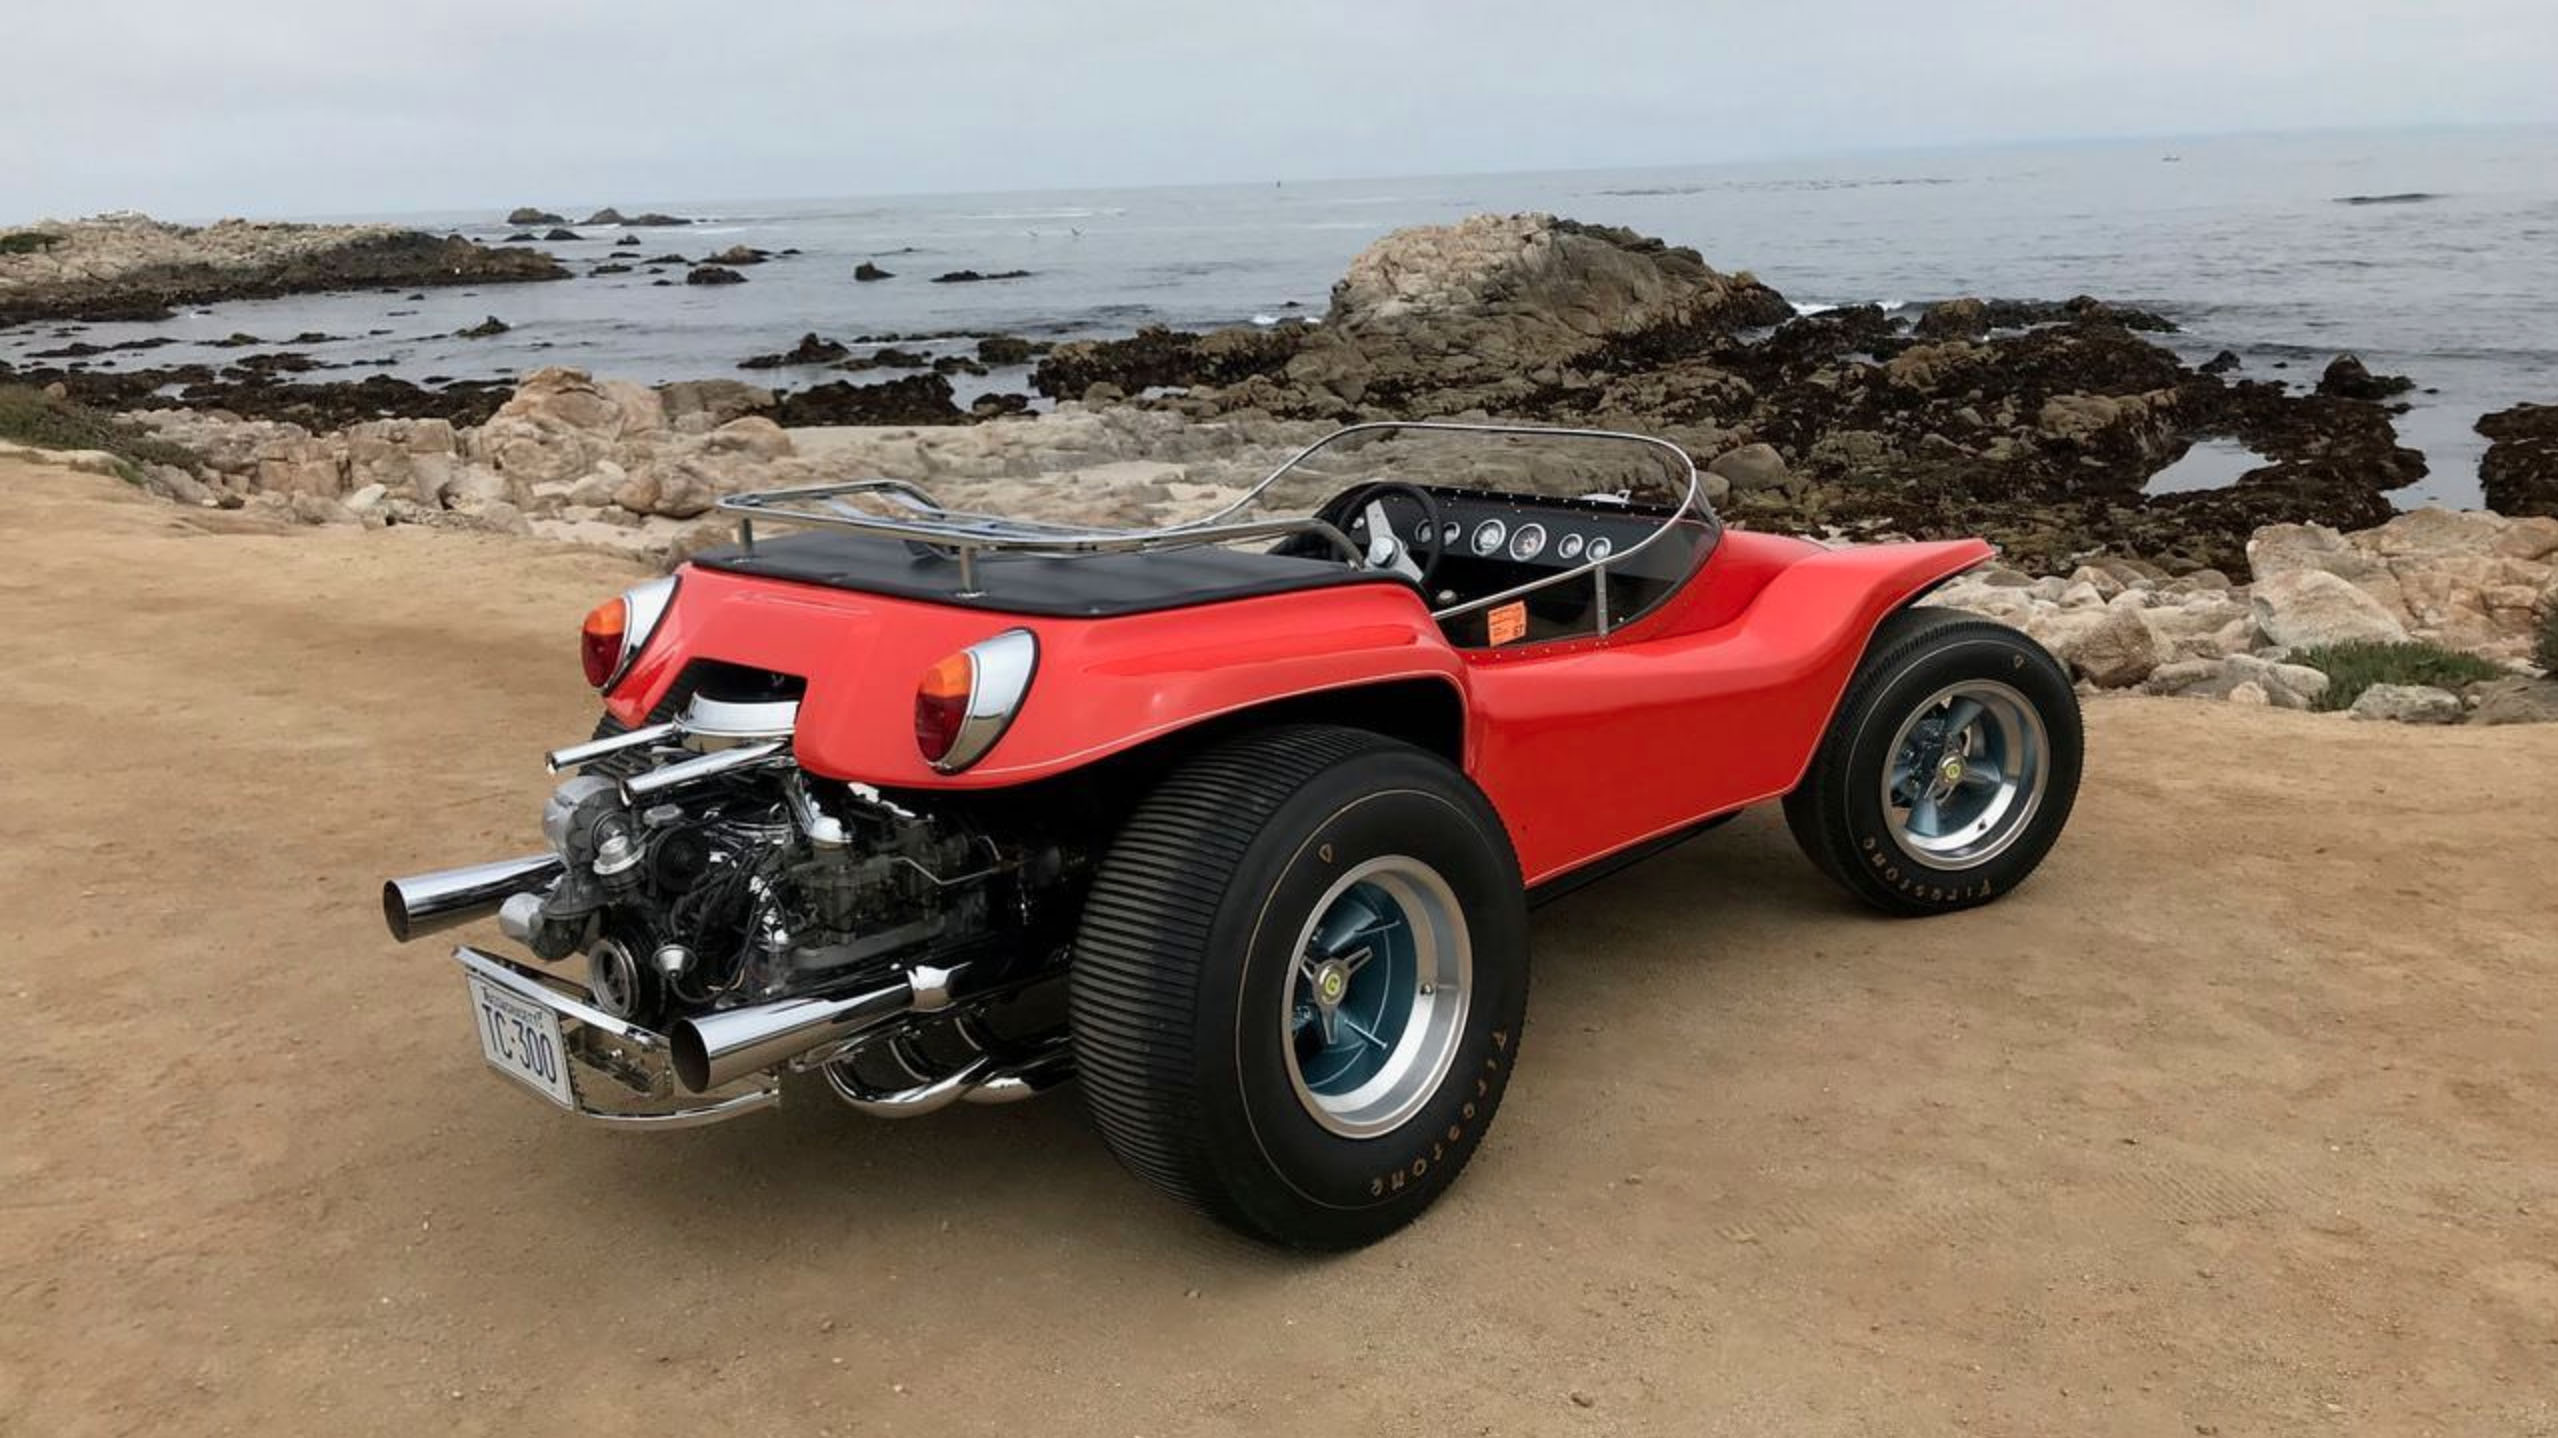 Meyers Manx Movie Dune Buggy Driven By Steve Mcqueen Goes To Auction